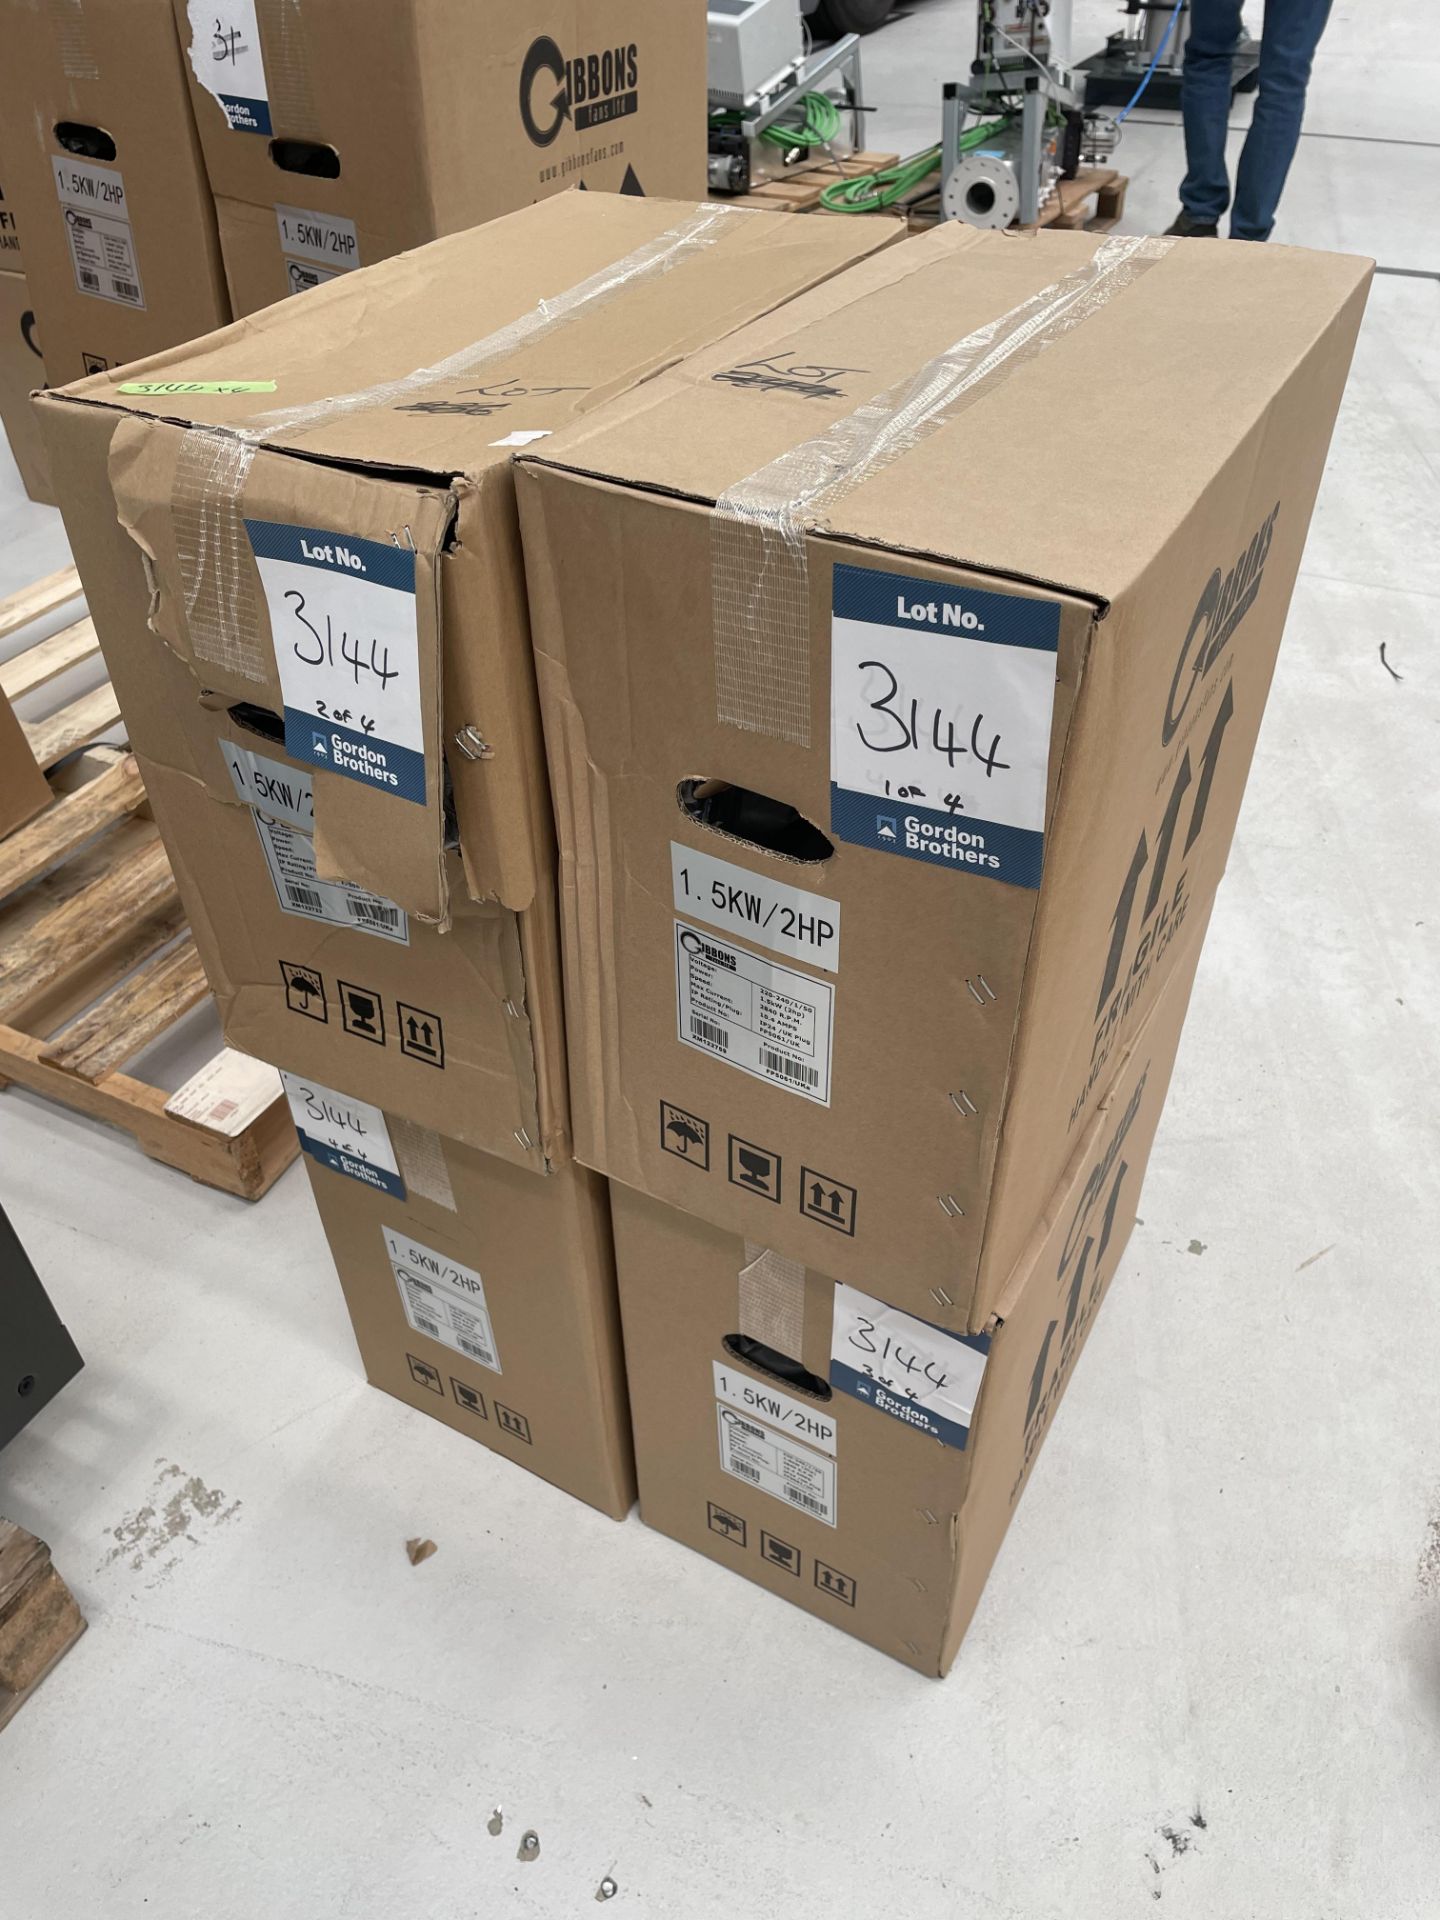 4x (no.) Gibbons, FPS061 blowers, 1.5kw/2HP (boxed and unused)